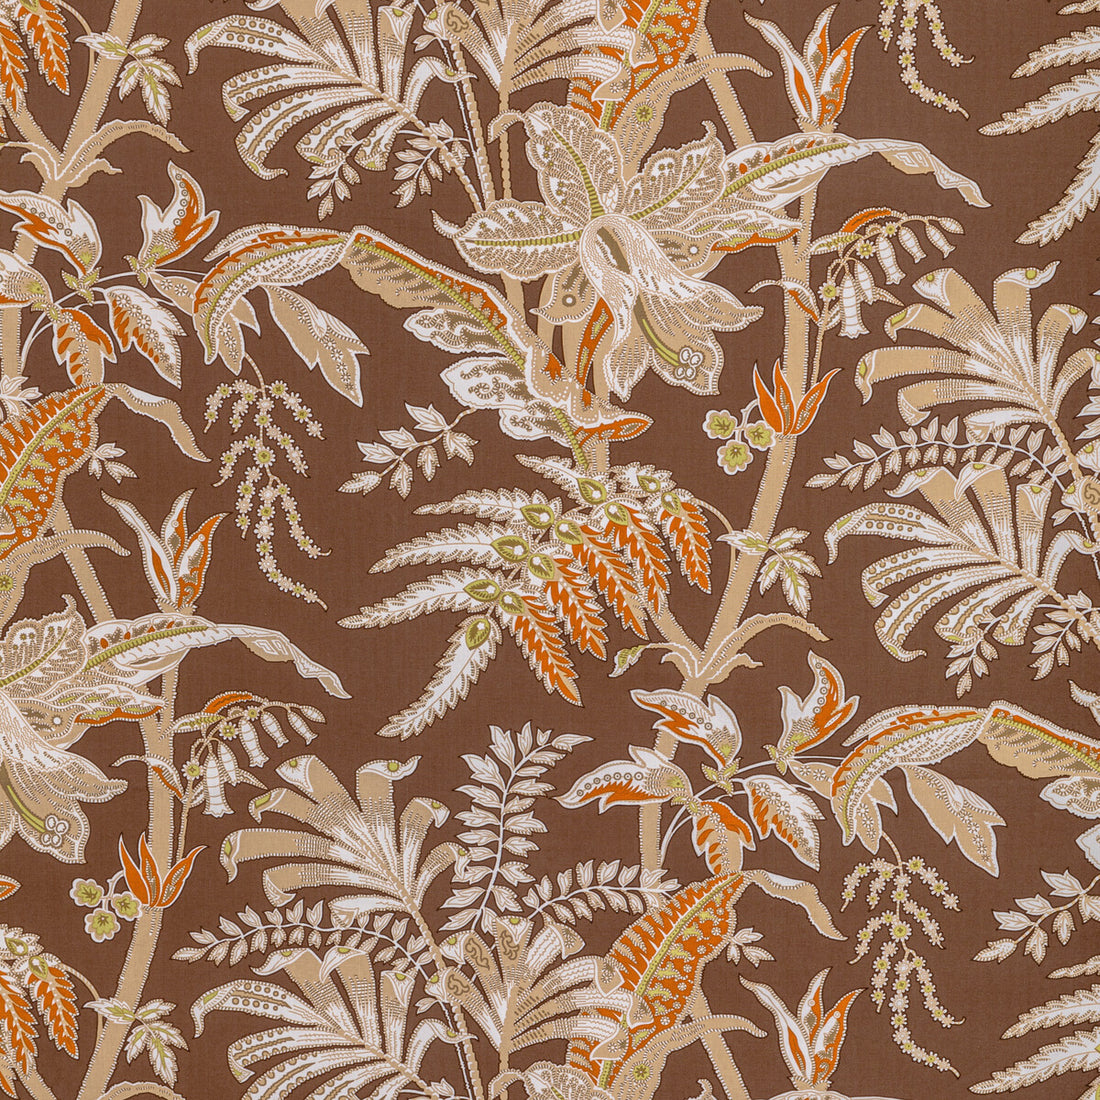 Seychelles Cotton Print fabric in mocha color - pattern BR-79121.630.0 - by Brunschwig &amp; Fils in the Manoir collection